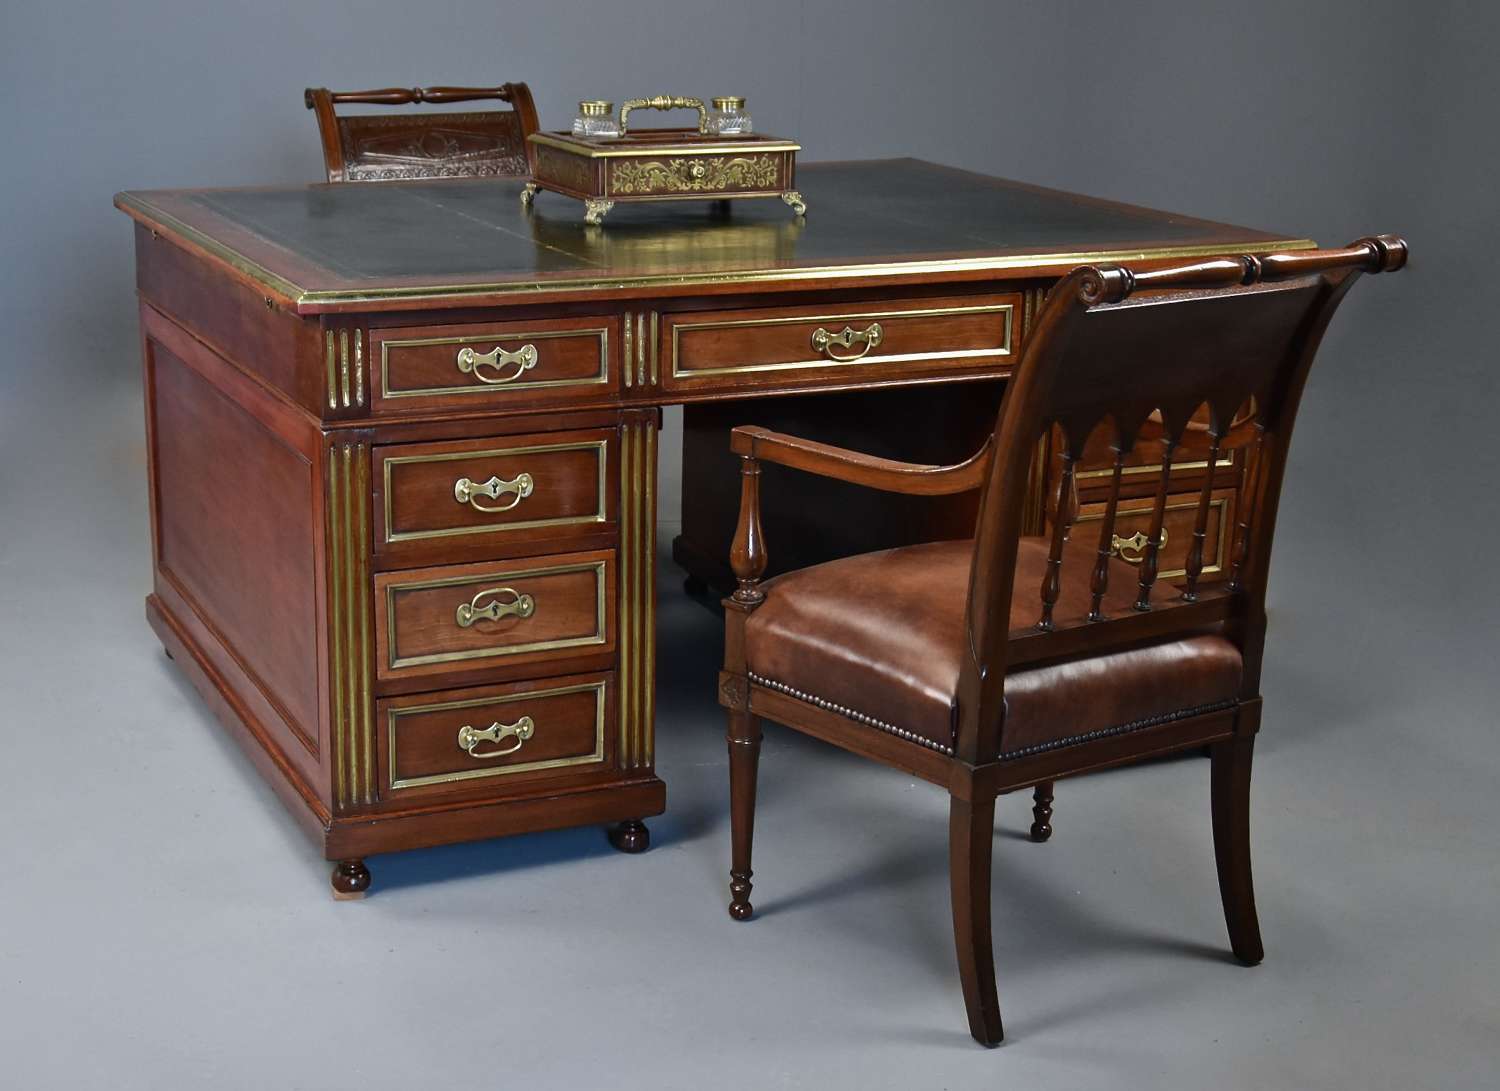 Late 19thc French mahogany partners desk in the Directoire style